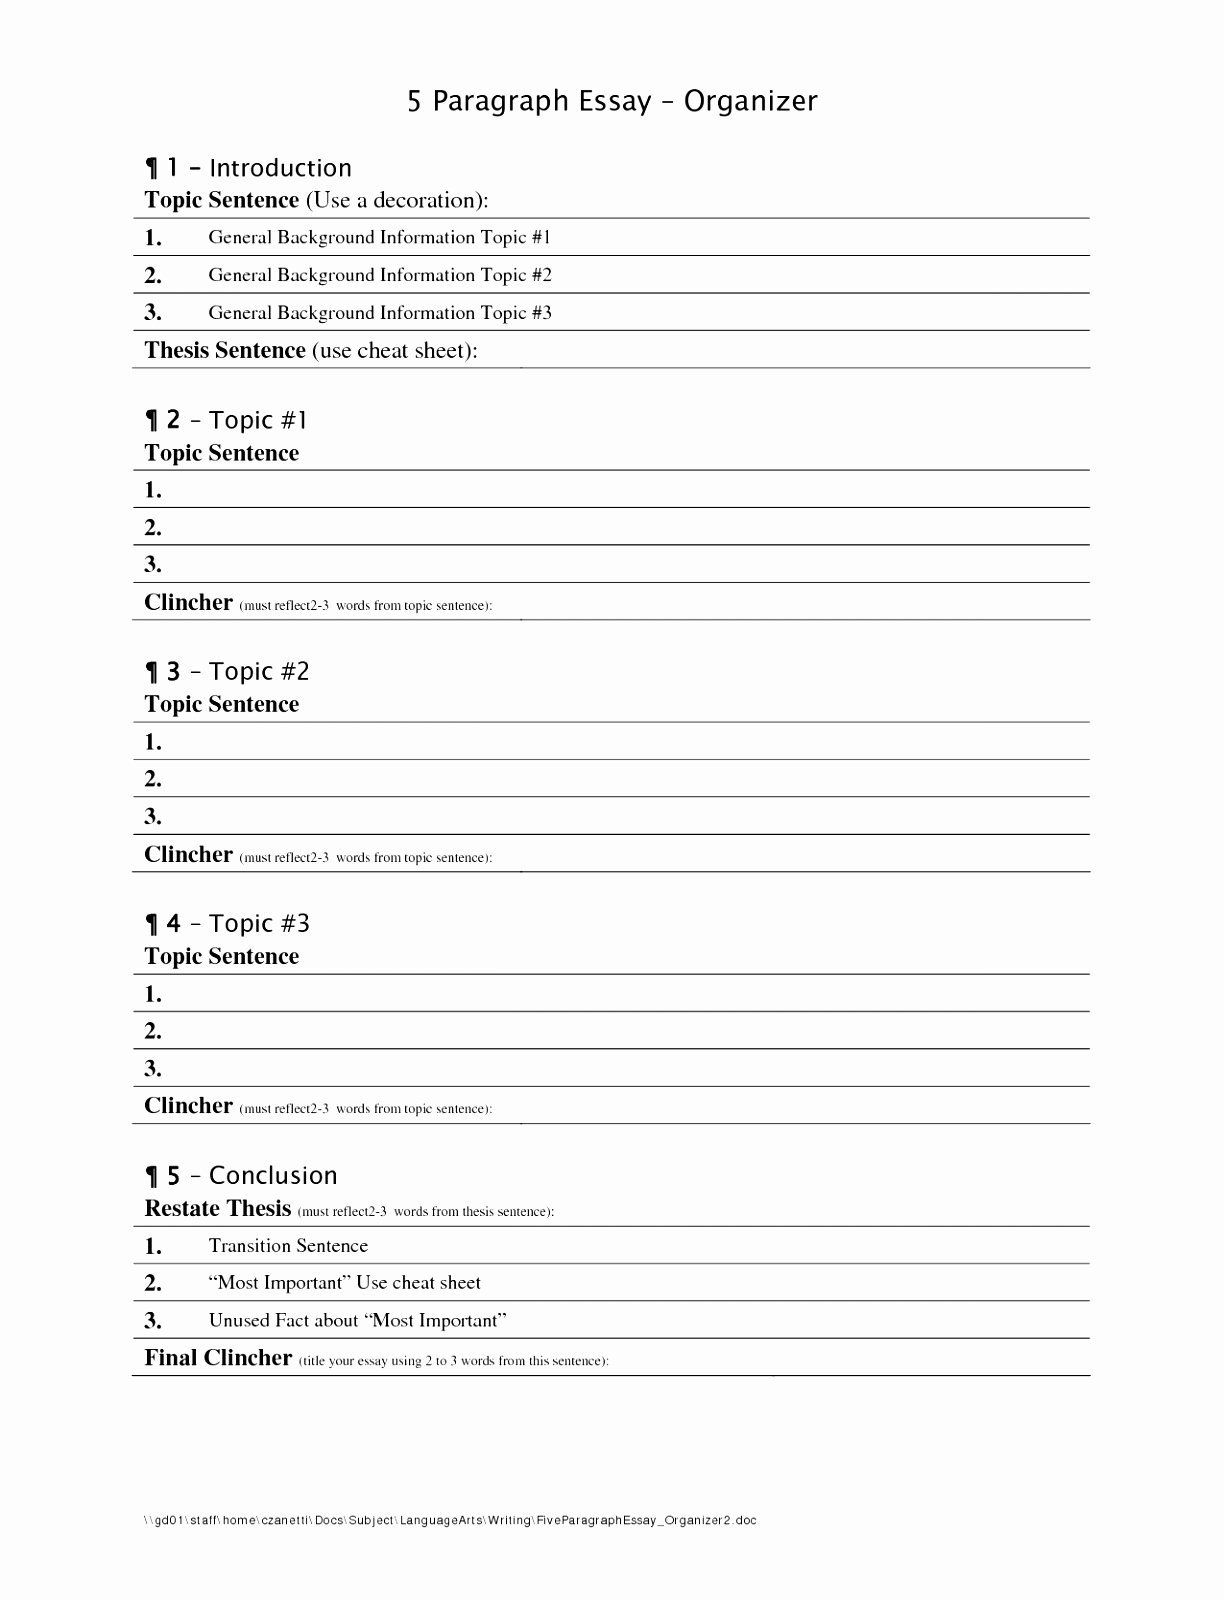 Essay Outline Template Printable Beautiful 5 Paragraph order Essay Reviews Article Heading Child